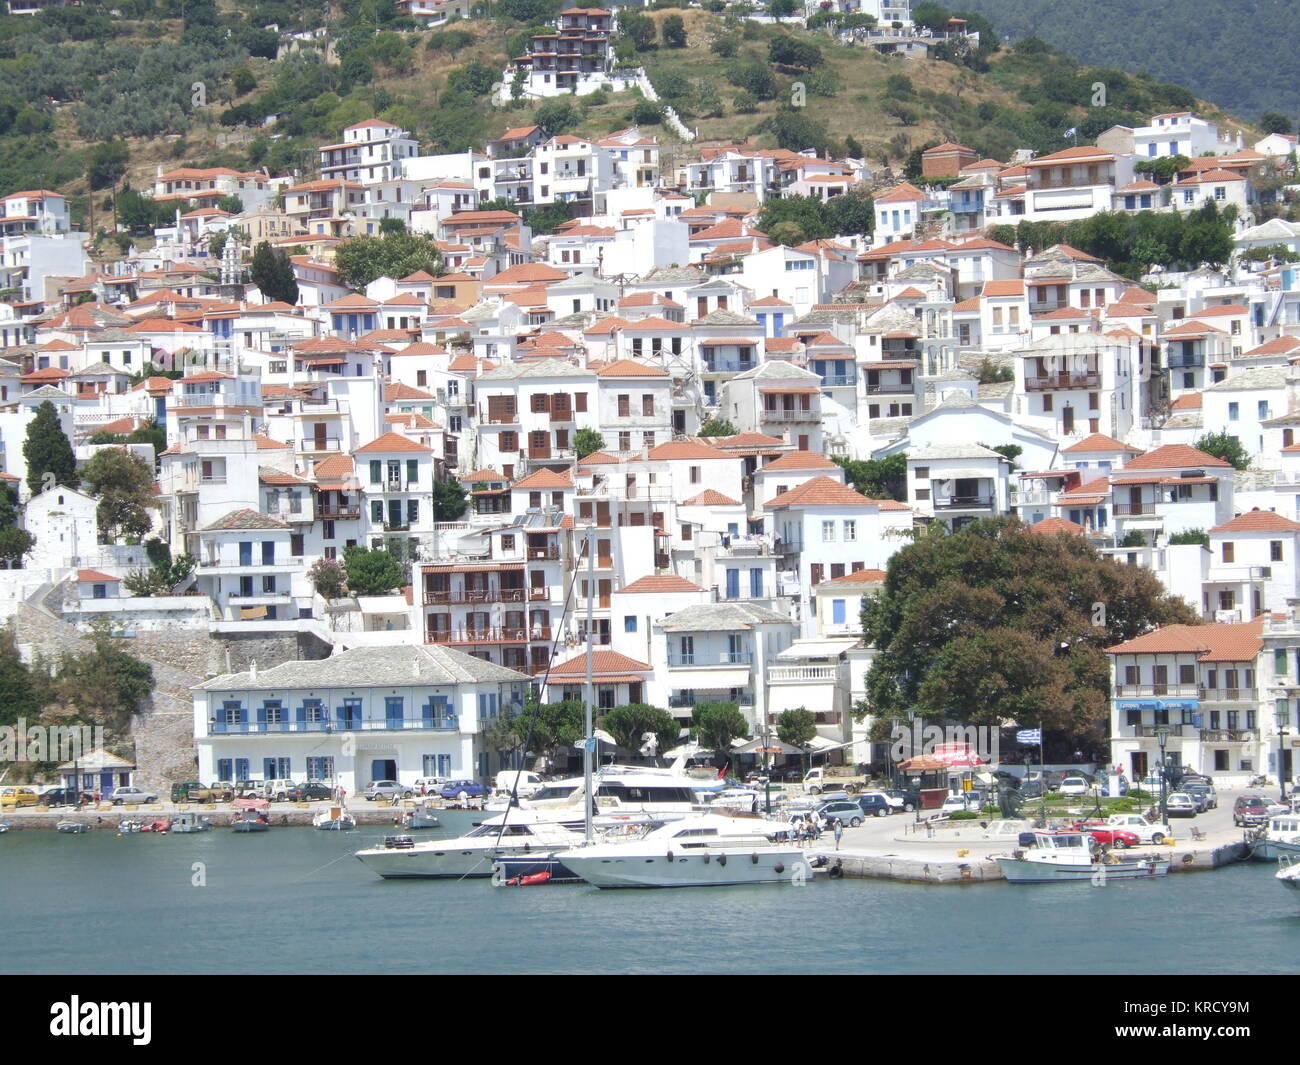 White painted housed with red  tile roofs cling to the  hillside town of Skopelos  Town, Skopelos, one of the  Sporades group of islands, of  Greece.     Date: 2006 Stock Photo